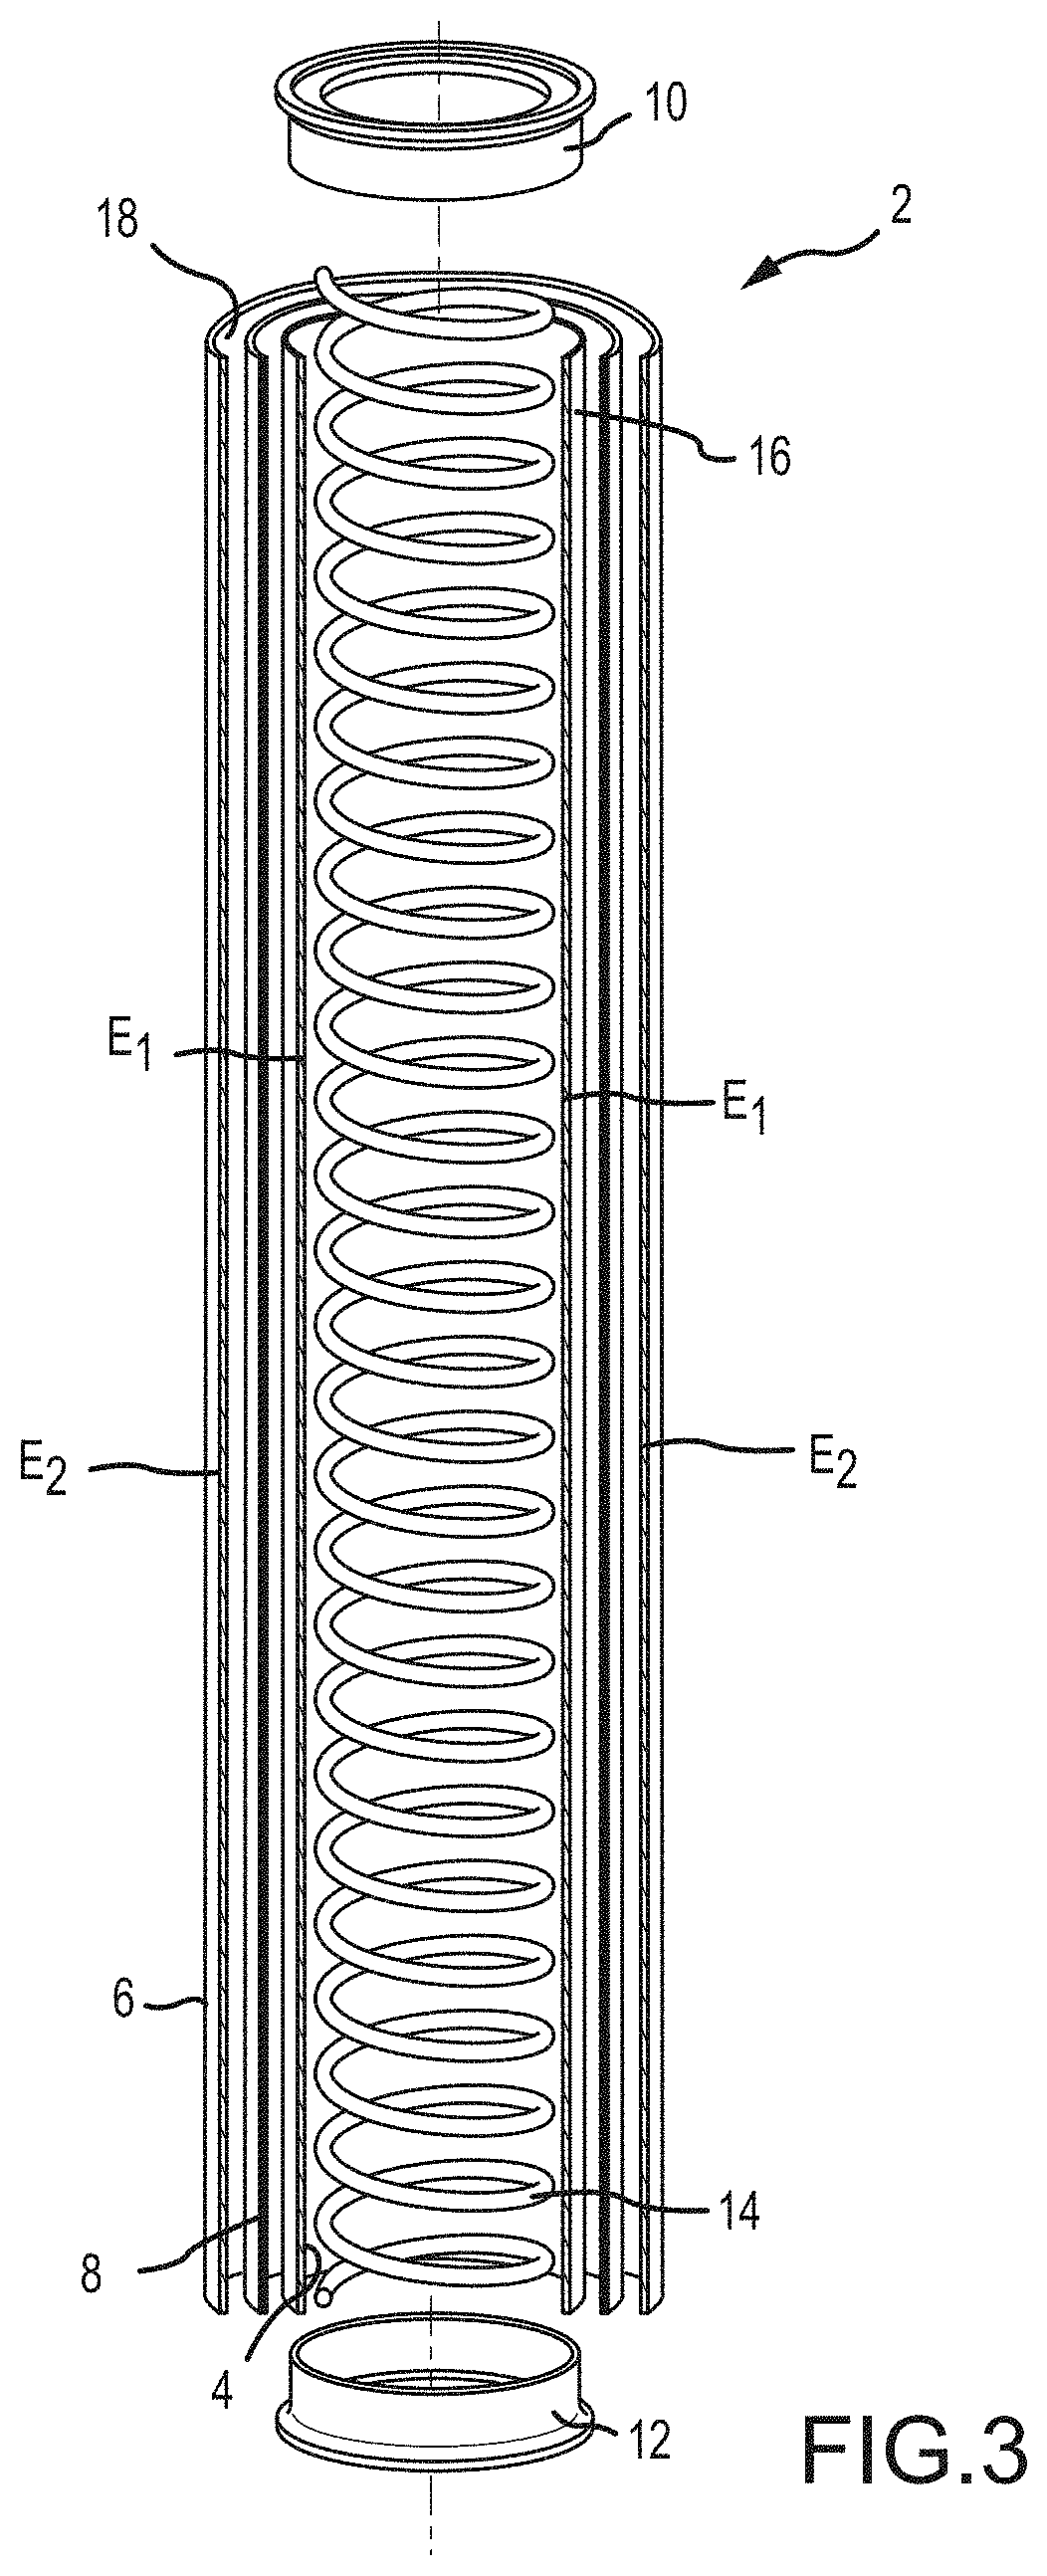 Flexible composite duct for the transport of cryogenic fuels and oxidizers